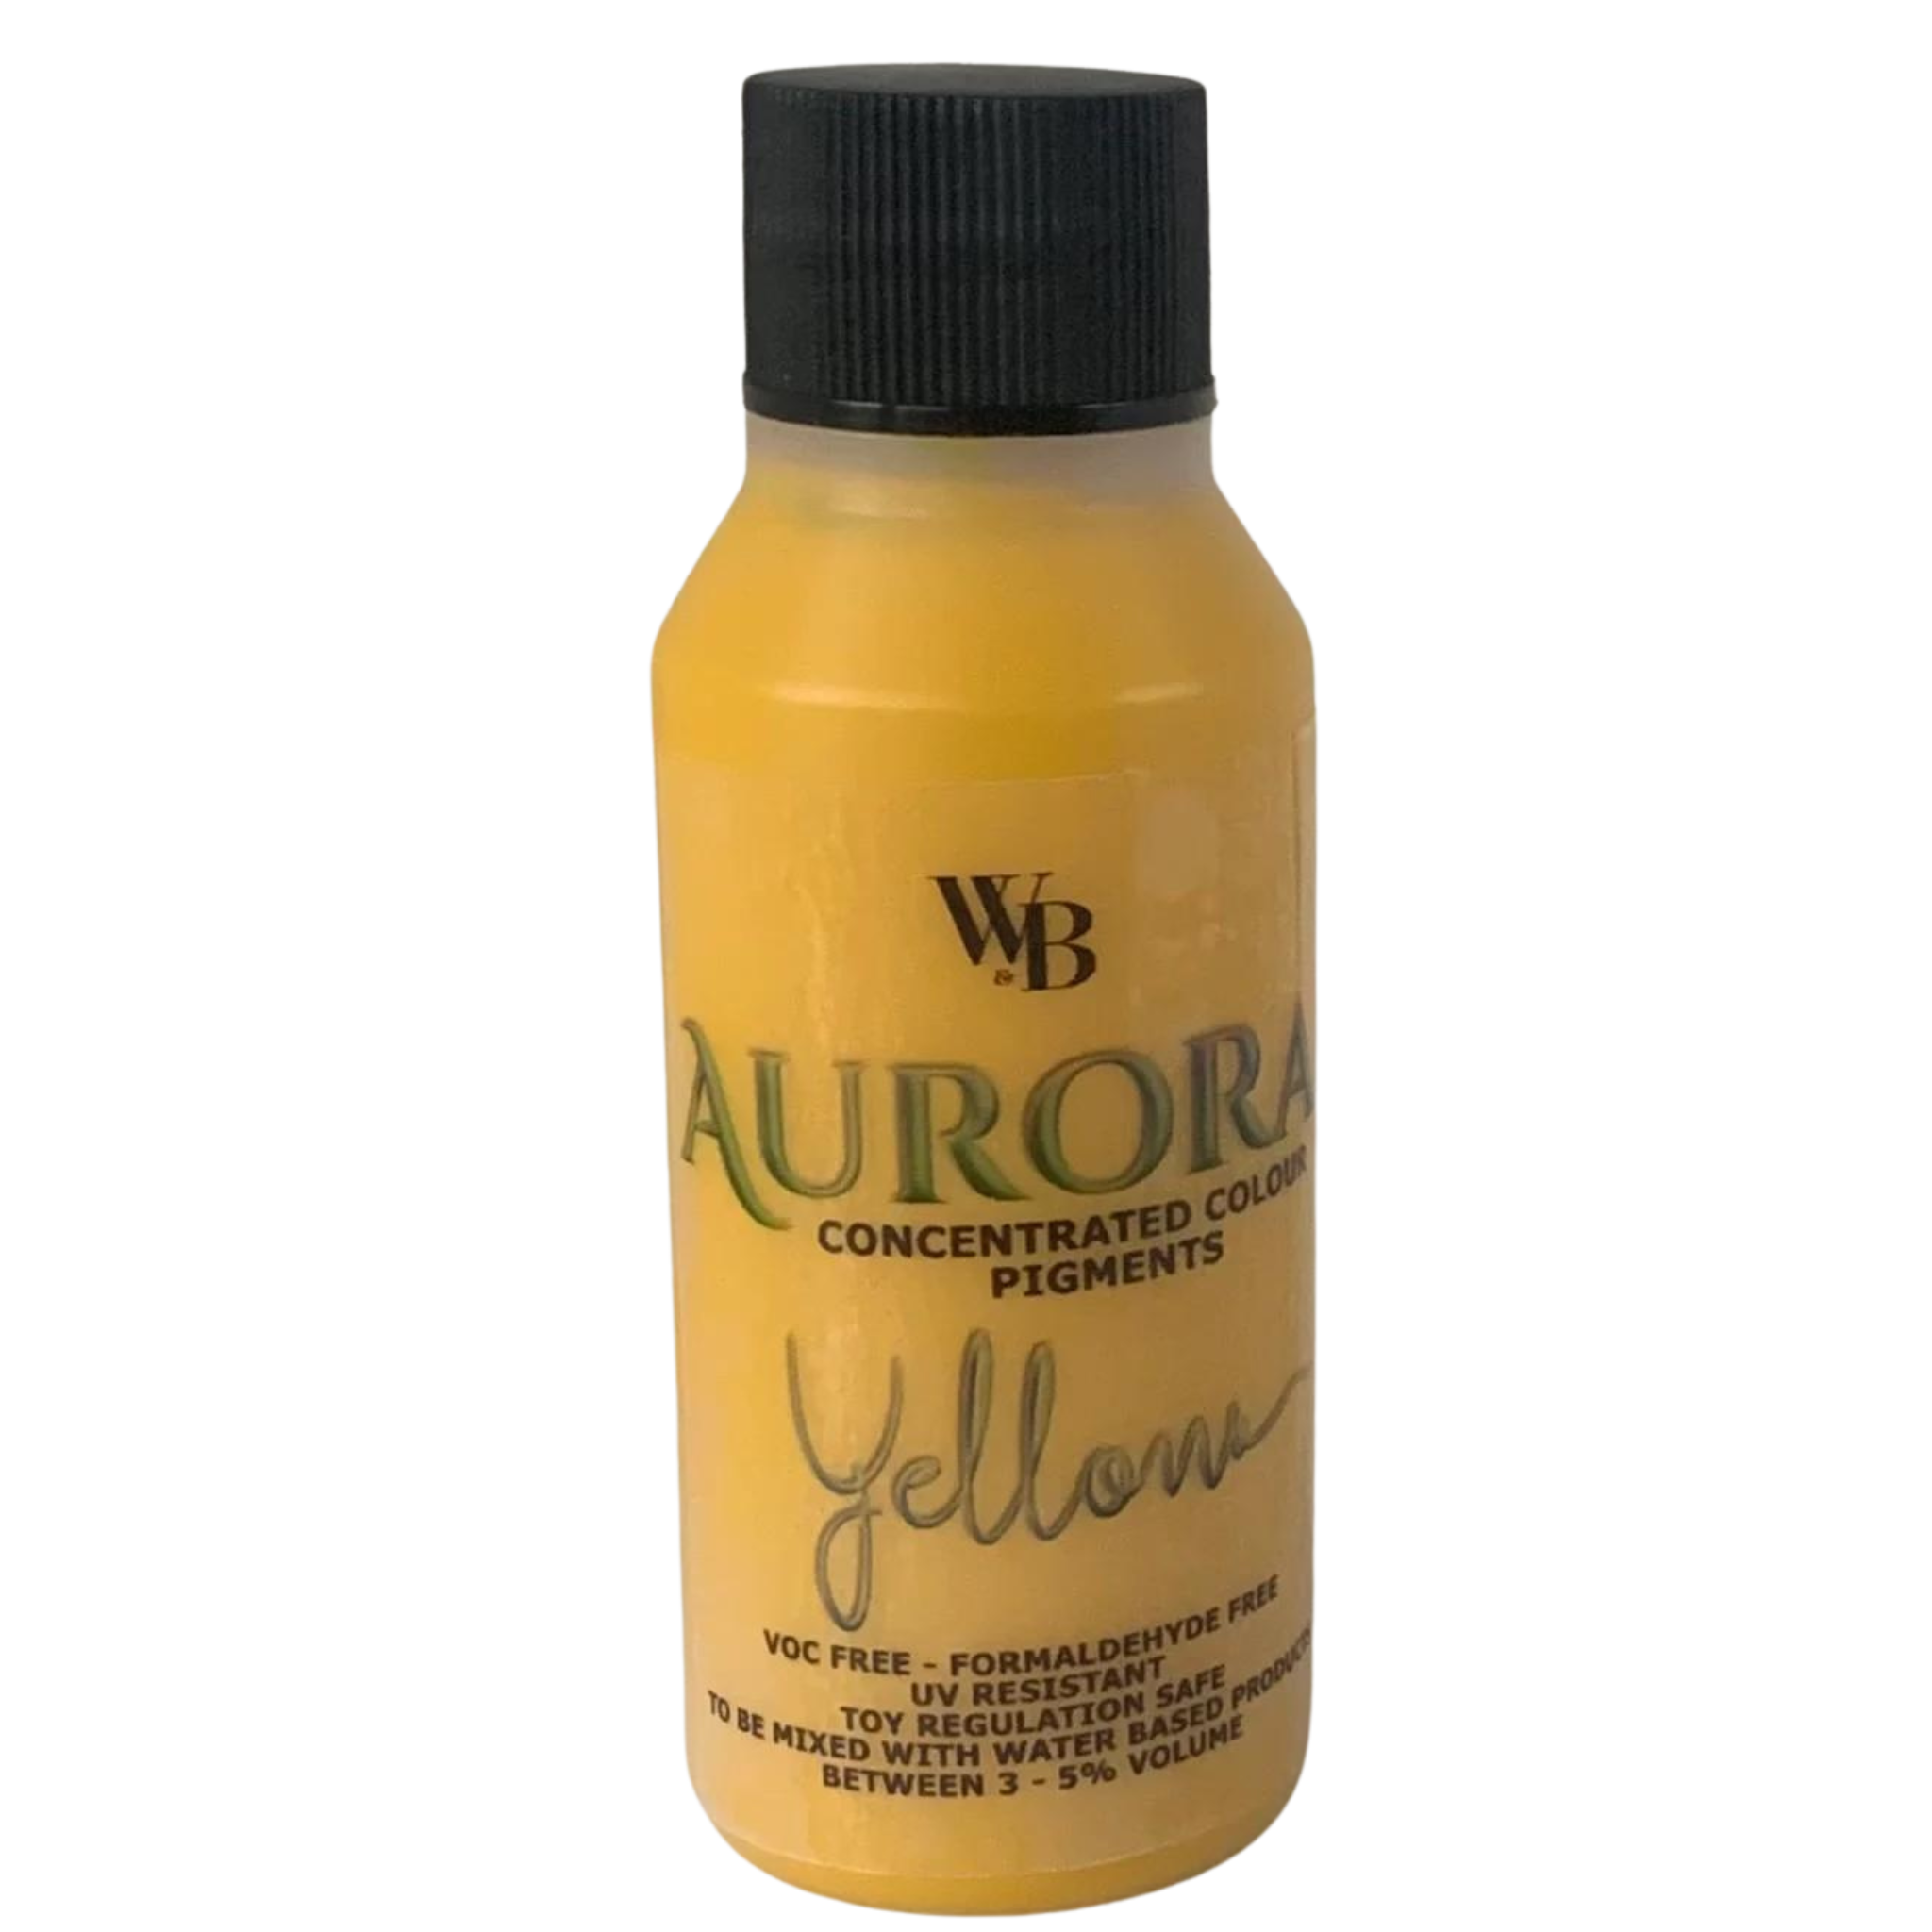 Aurora Concentrated Pigments